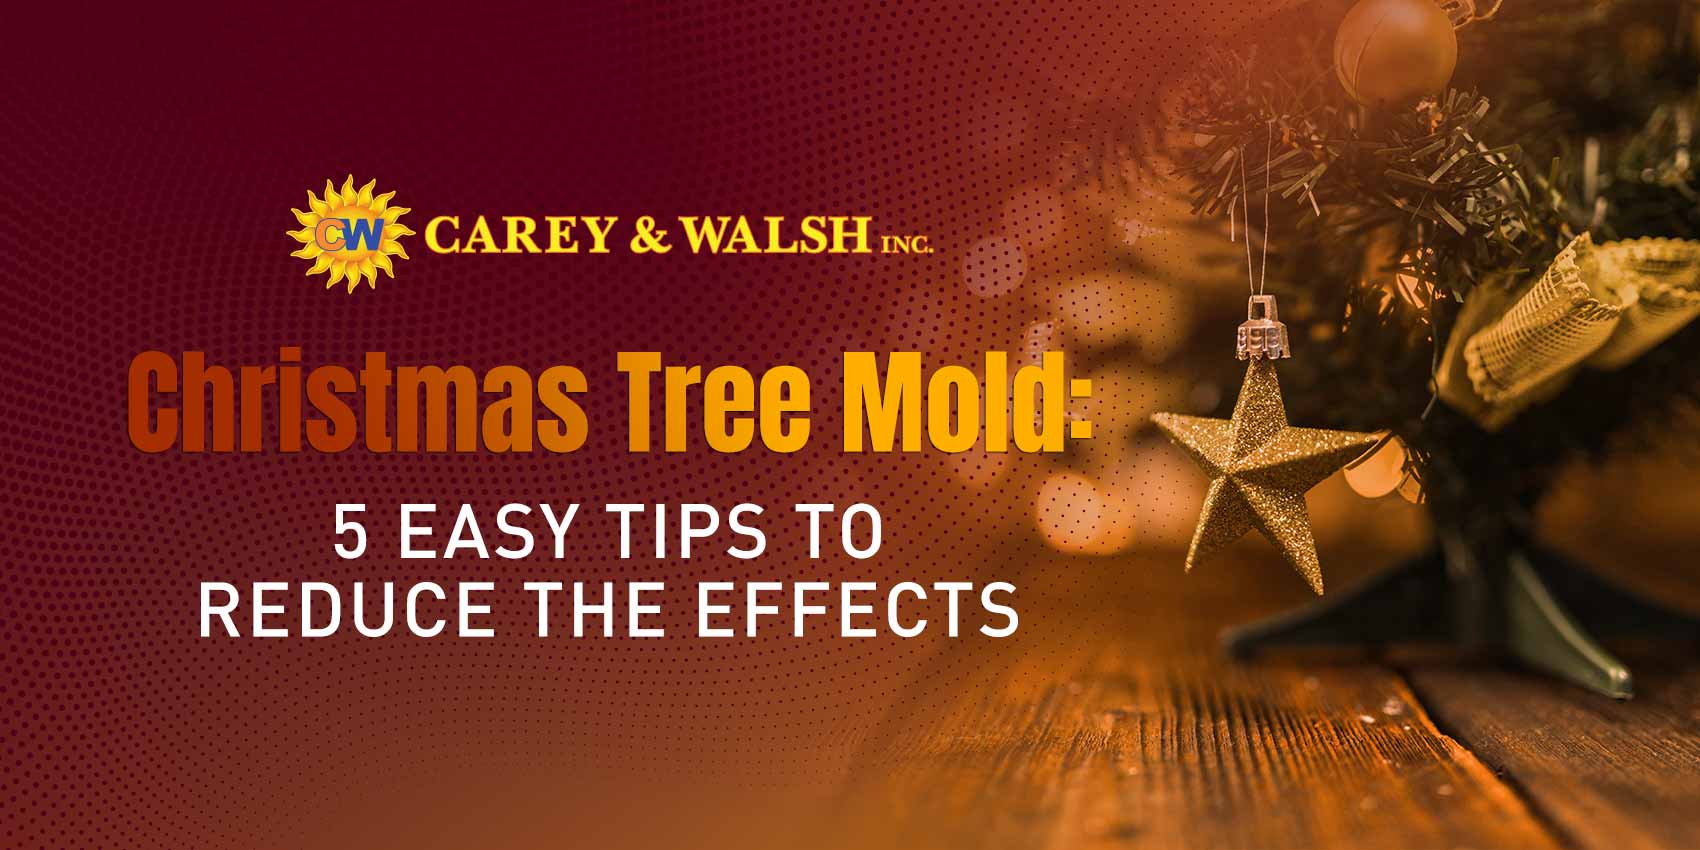 Christmas Tree Mold: 5 Easy Tips to Reduce the Effects